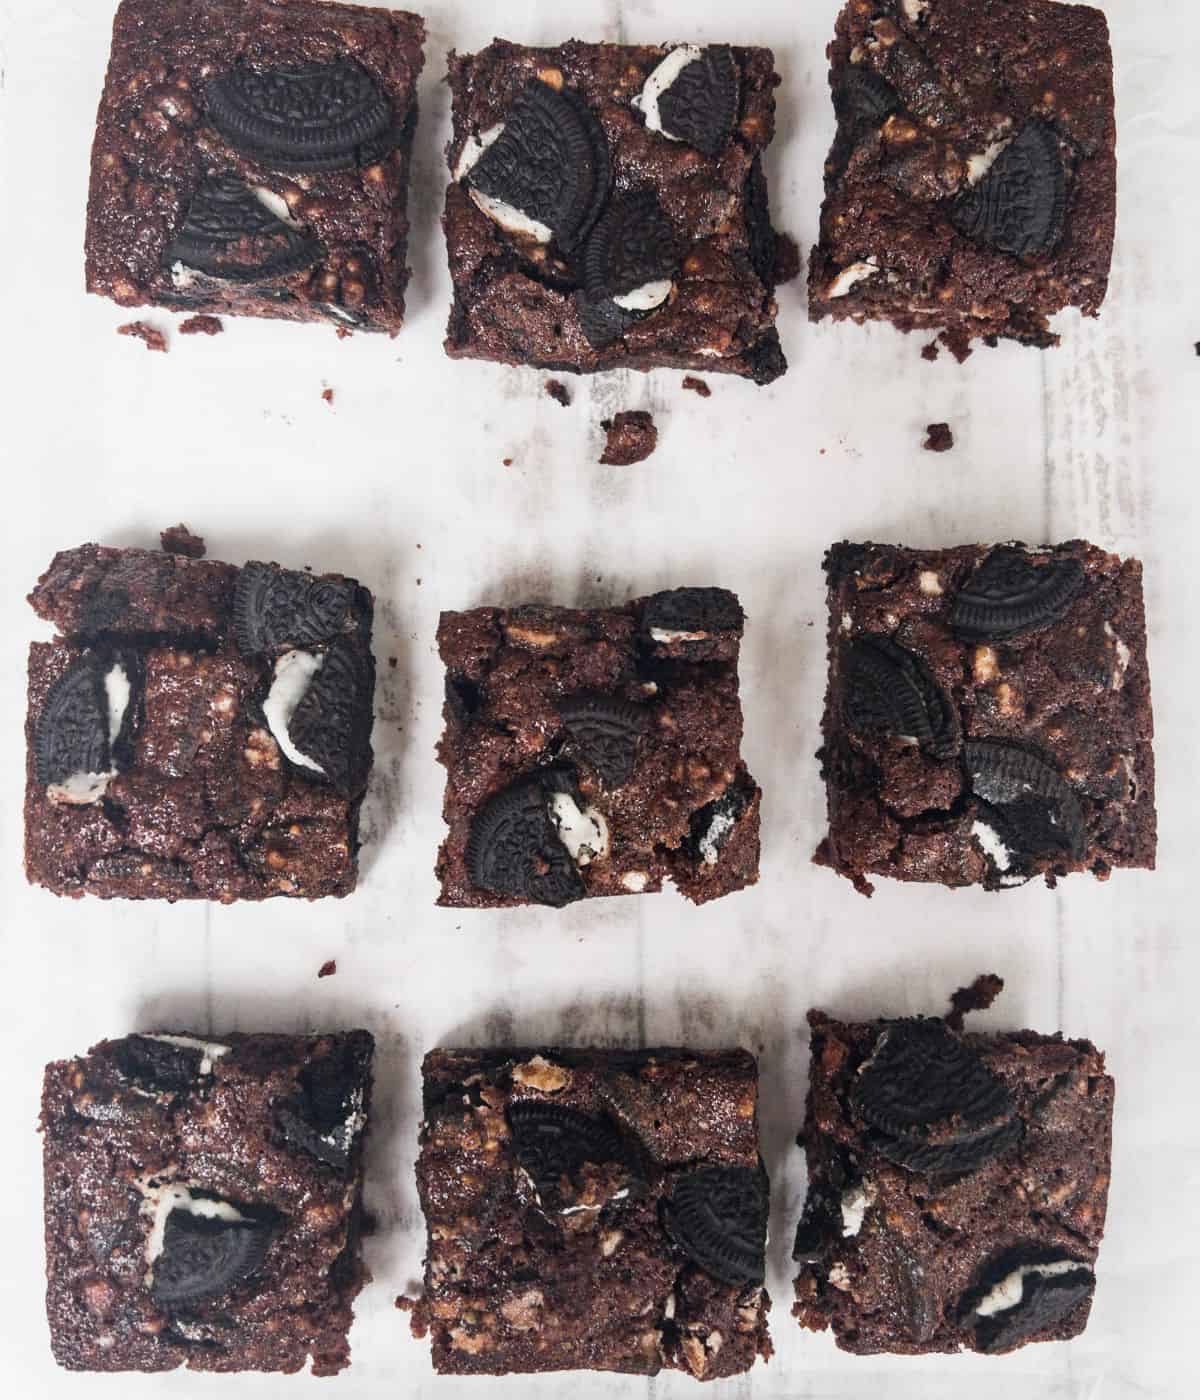 vegan oreo chocolate brownies sliced into squares on a white background